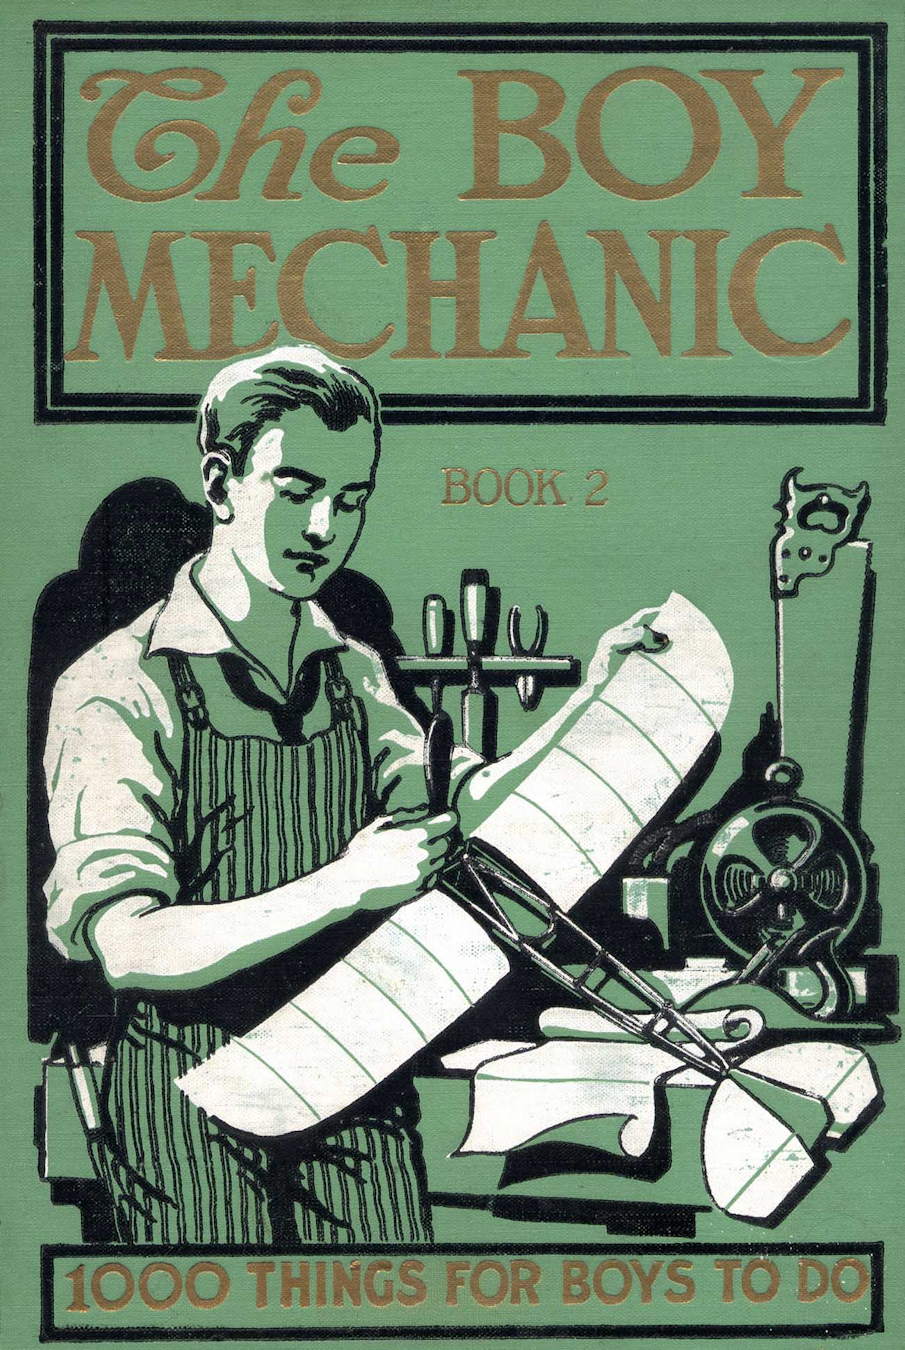 The Project Gutenberg eBook of The Boy Mechanic Book 2 by H. H. Windsor.